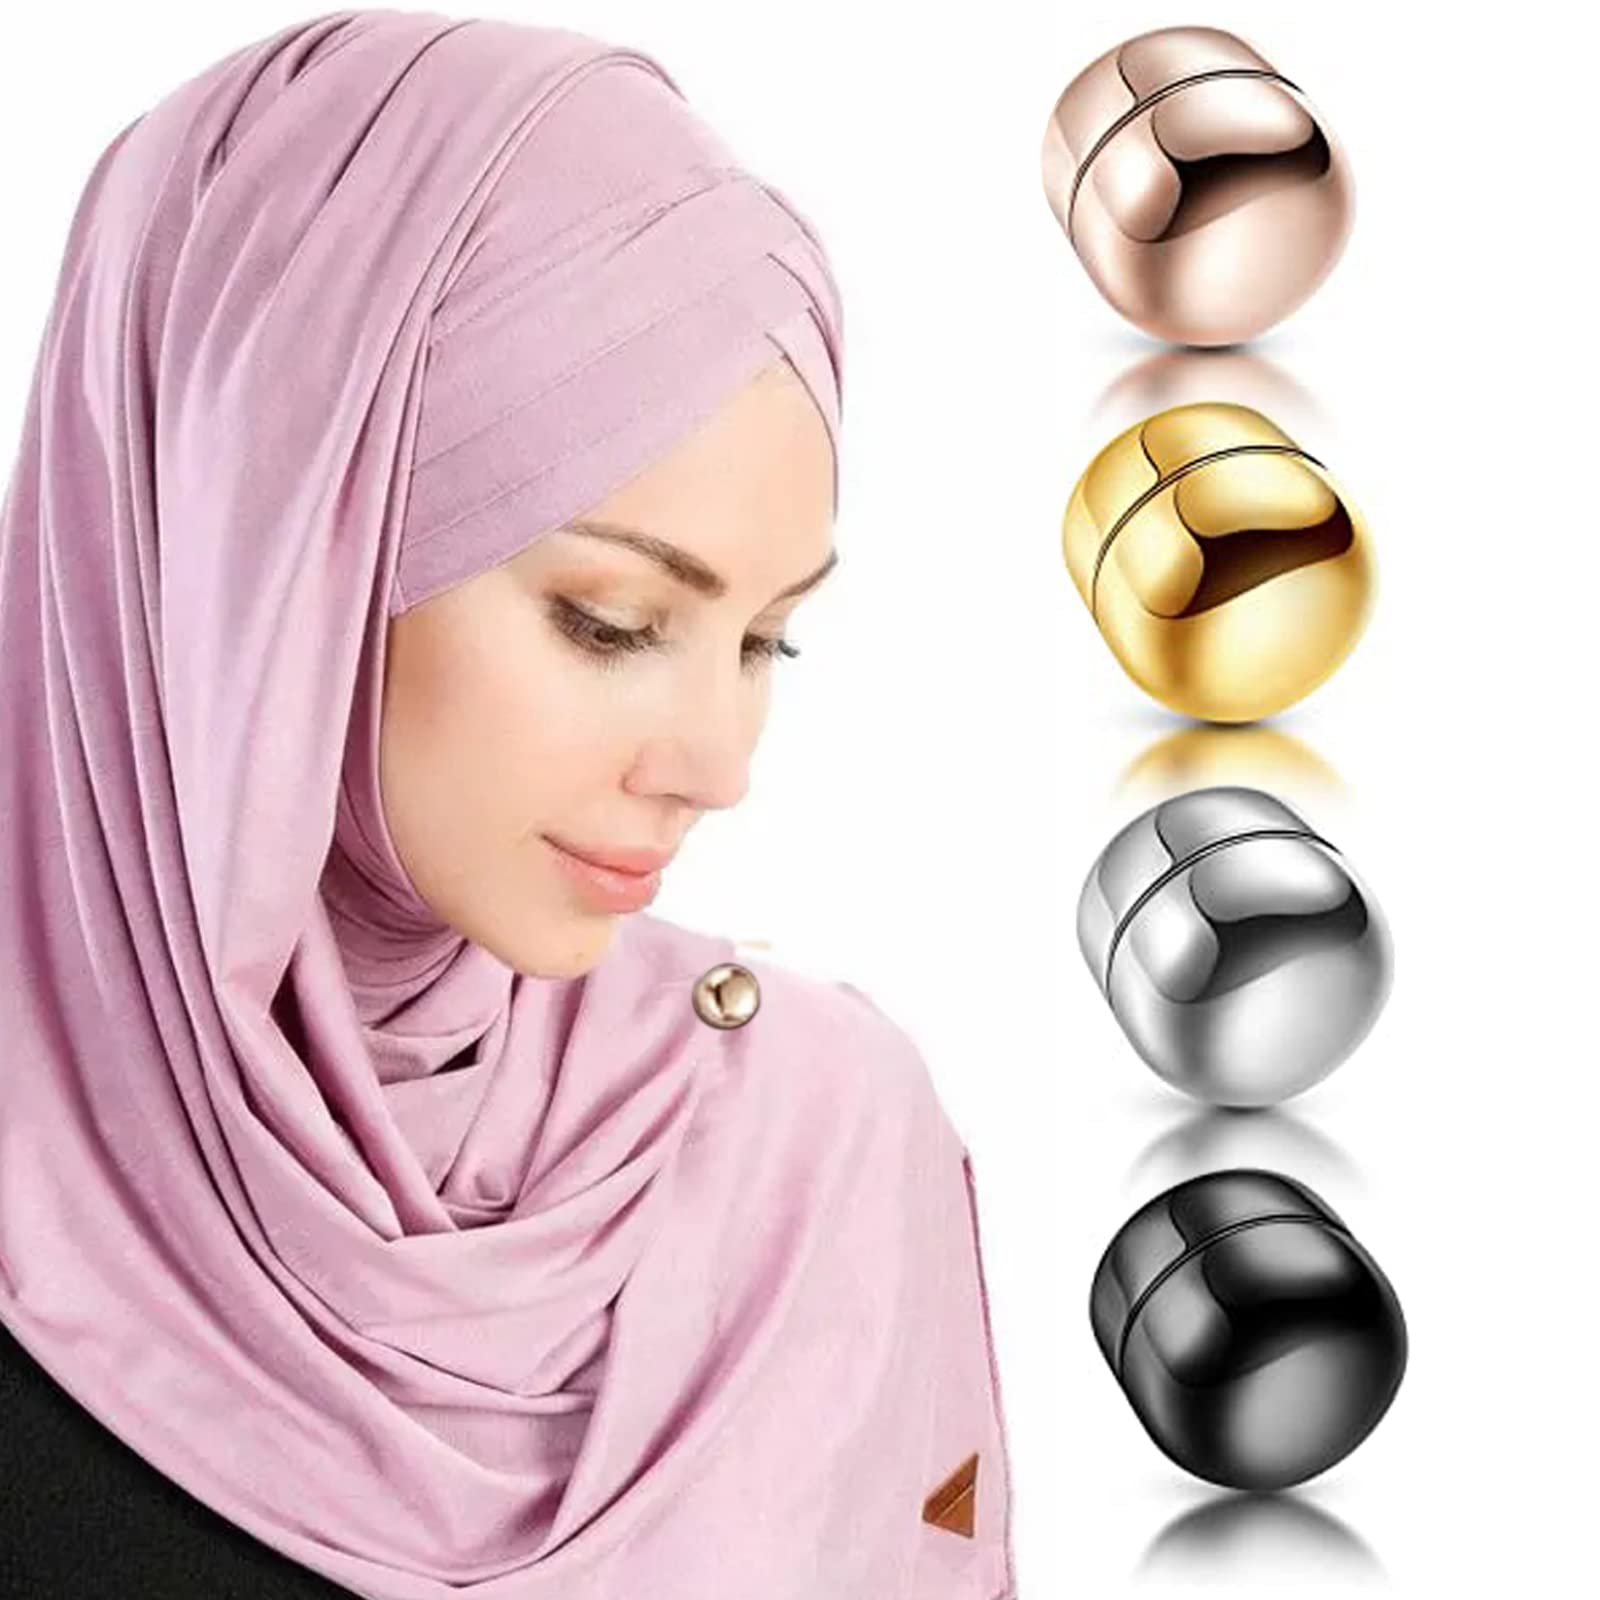 12 pcs Fancy Plain Colorful Scarves Safety Pin,Scarf Pins,Hijab